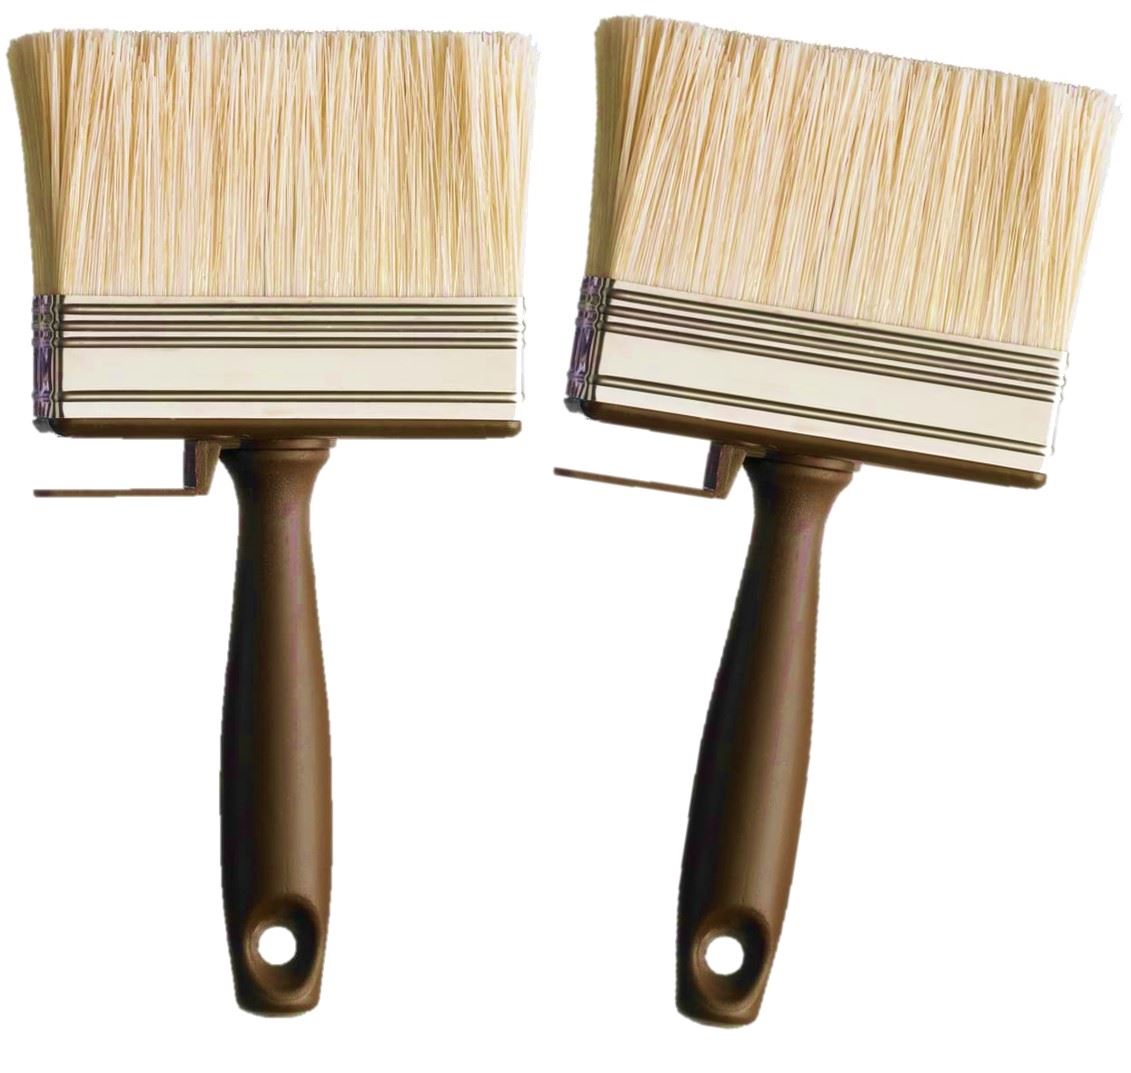 Shed and Fence Brush - Pack of 2